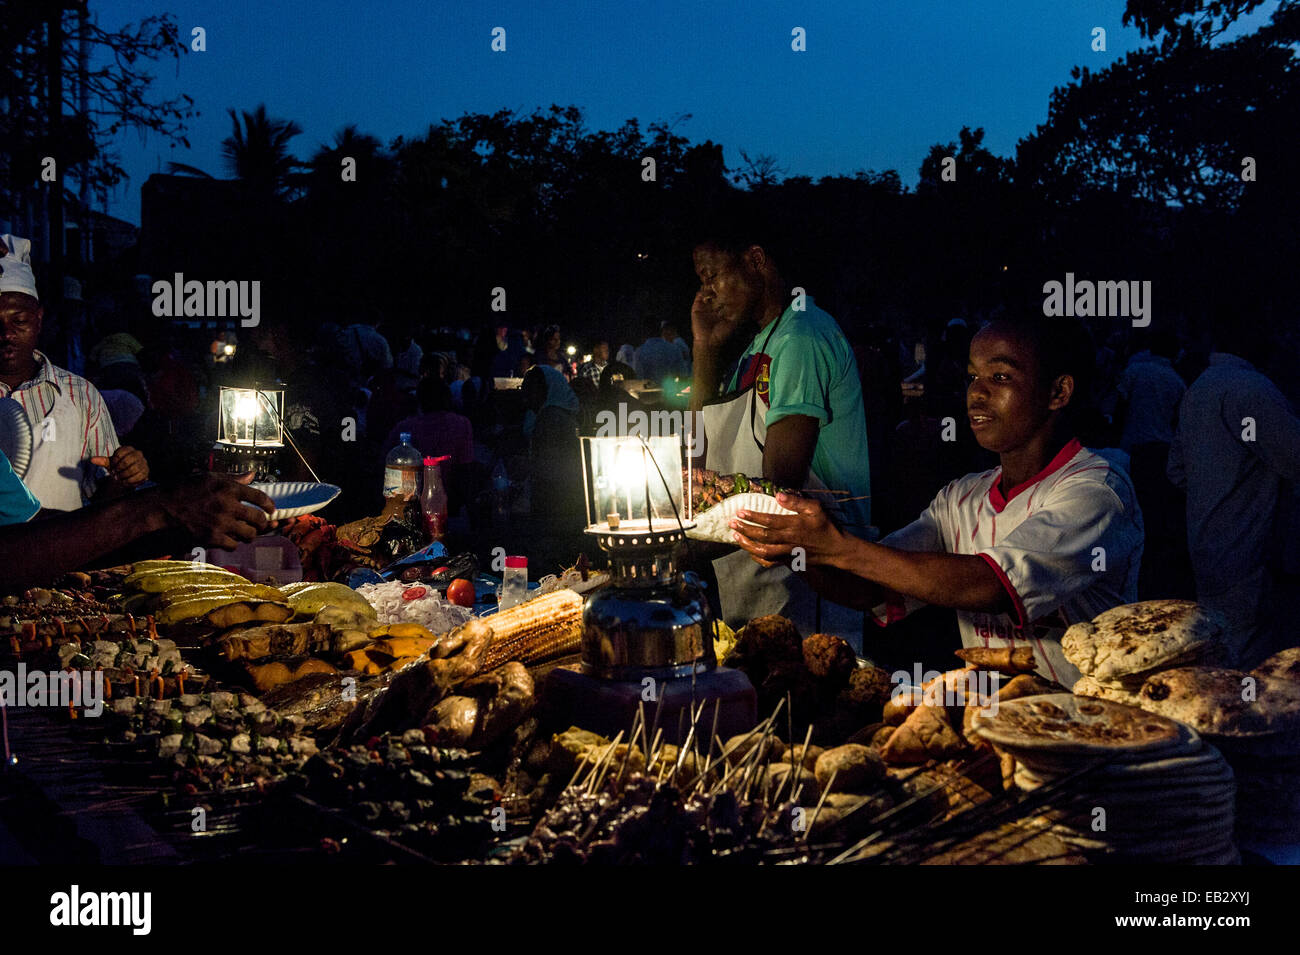 Food stall vendors prepare fresh food for shoppers at a night market by the Indian Ocean. Stock Photo